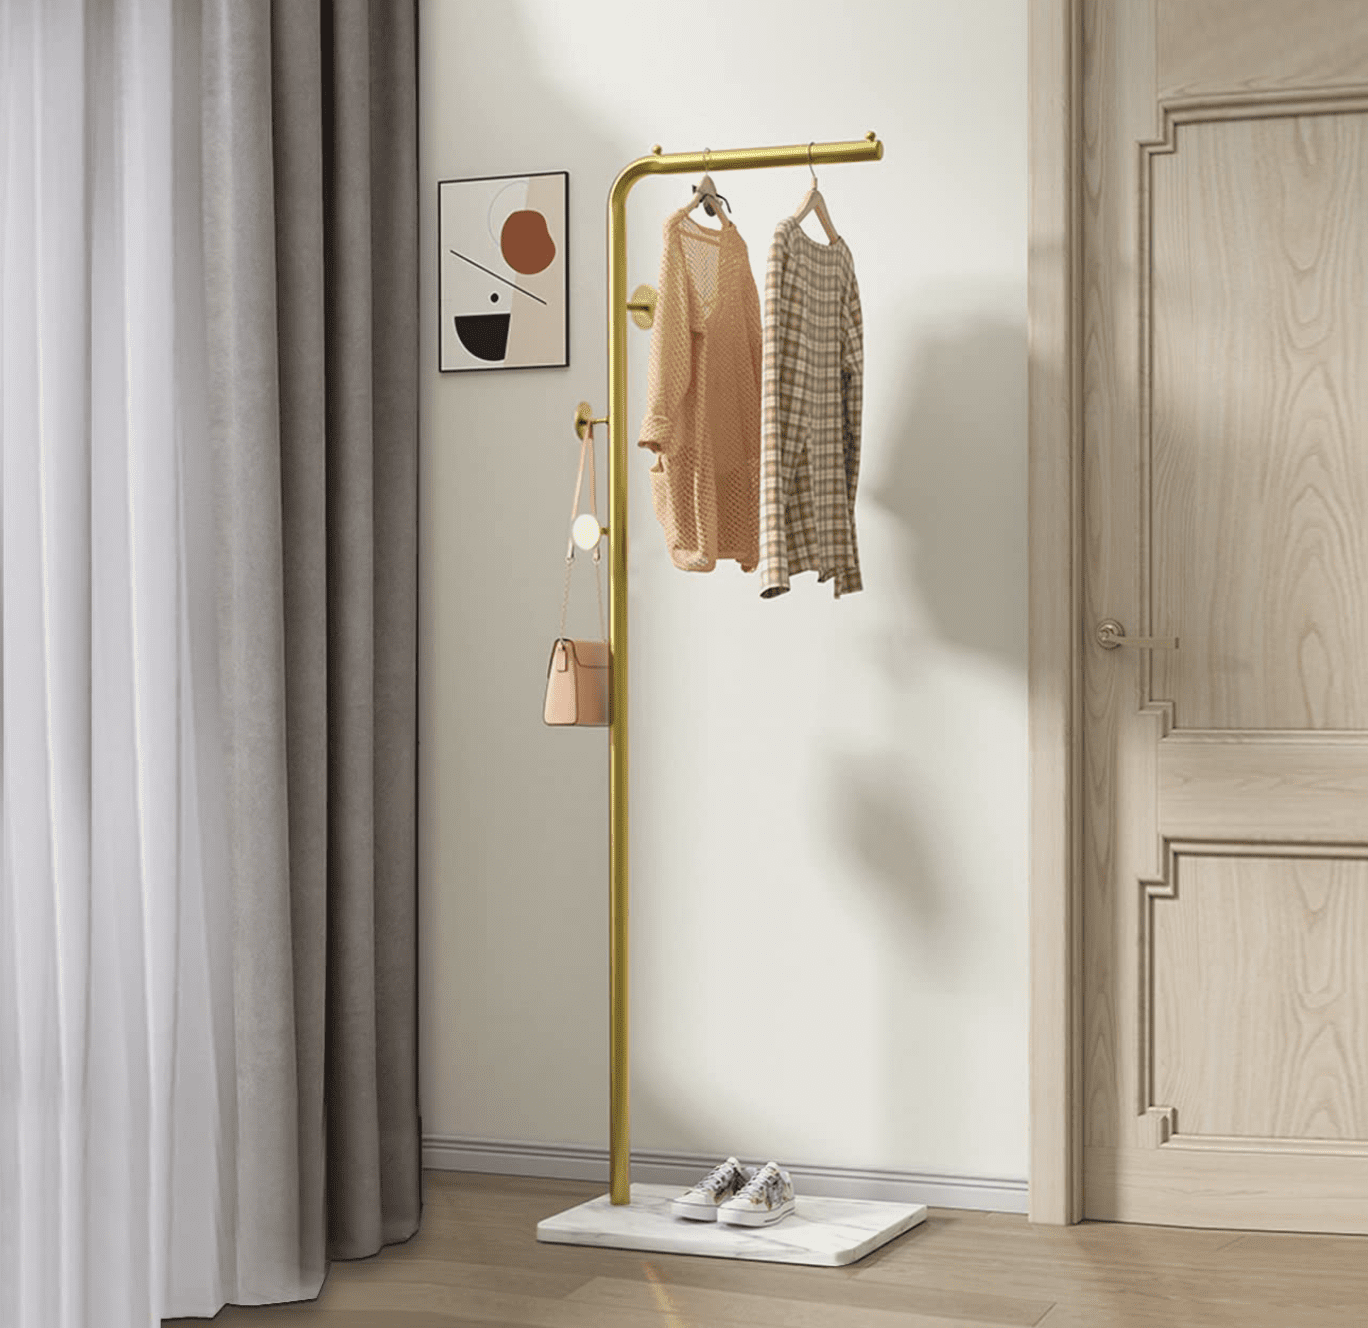 These Stylish Coat Racks Will Help Corral All Your Winter Must